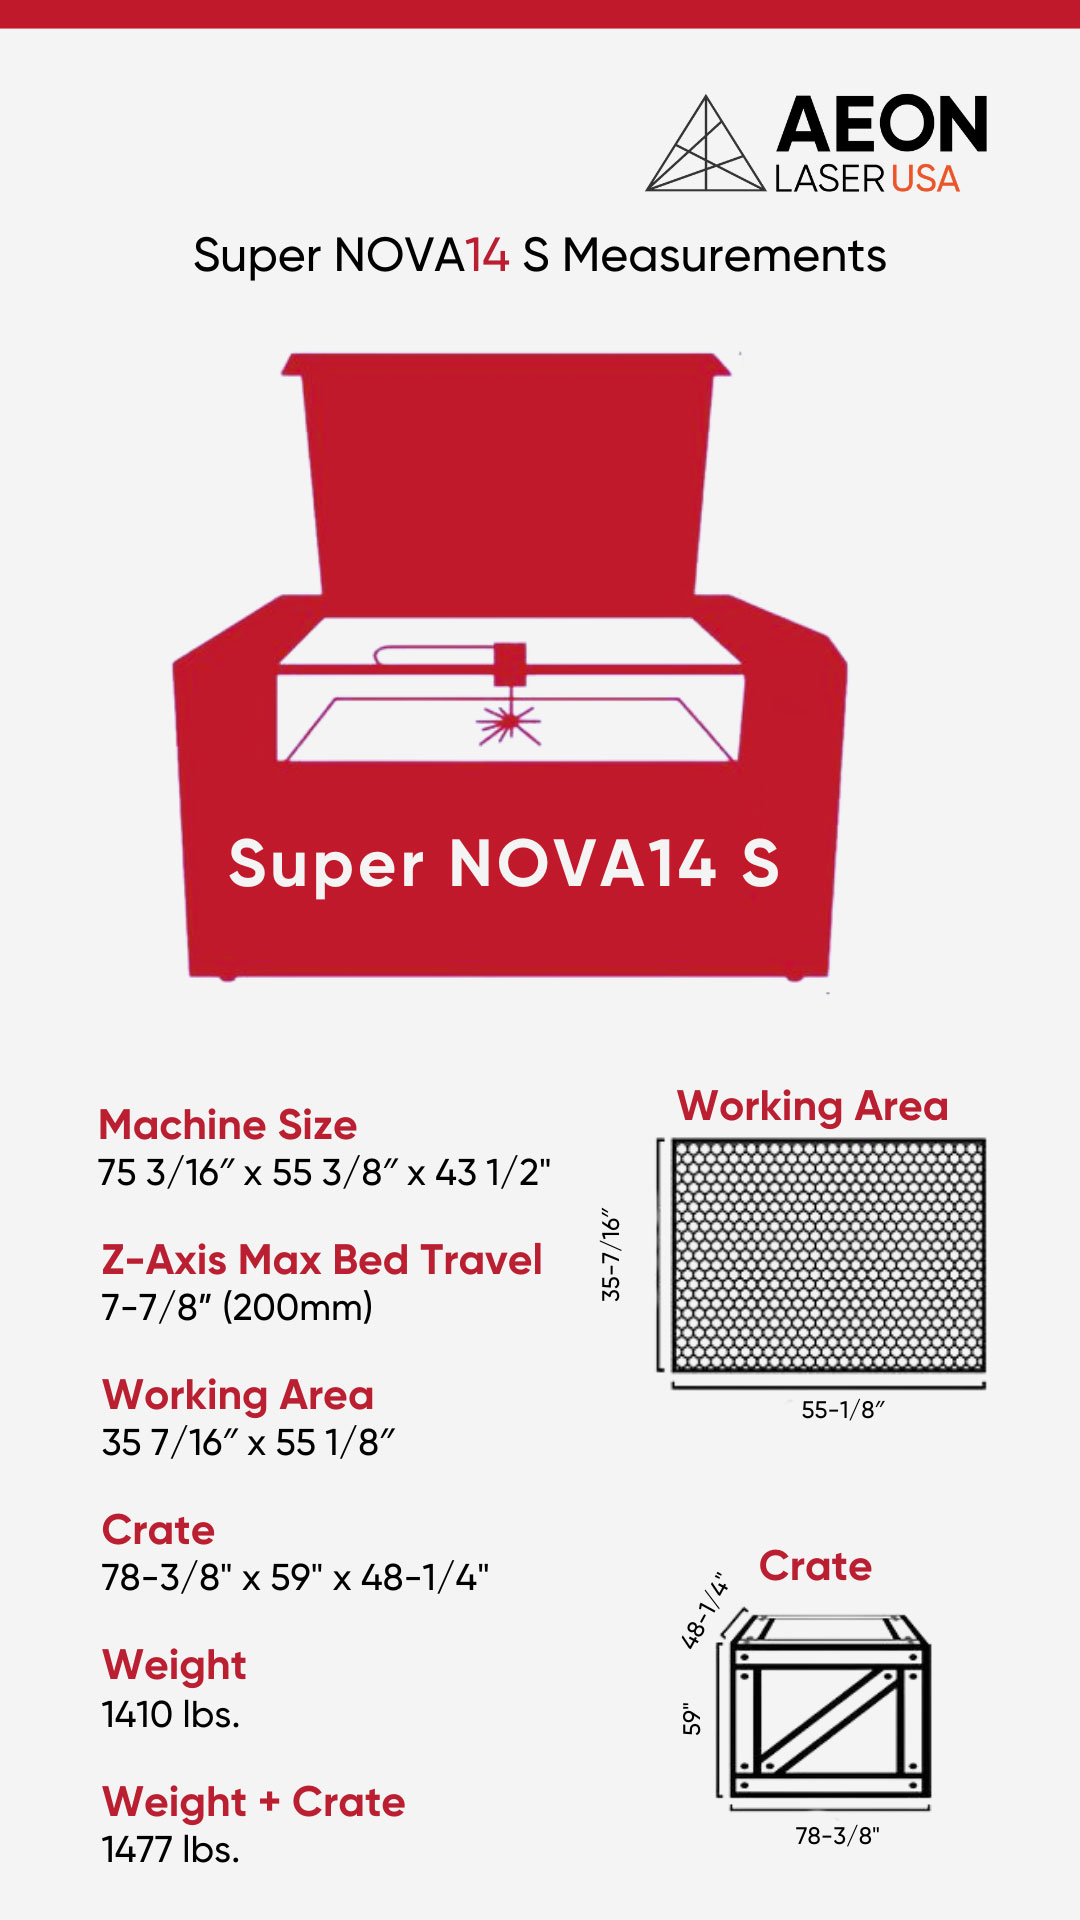 Graphic showing the dimensions of the Super NOVA 14 S laser, crate size, and weight info